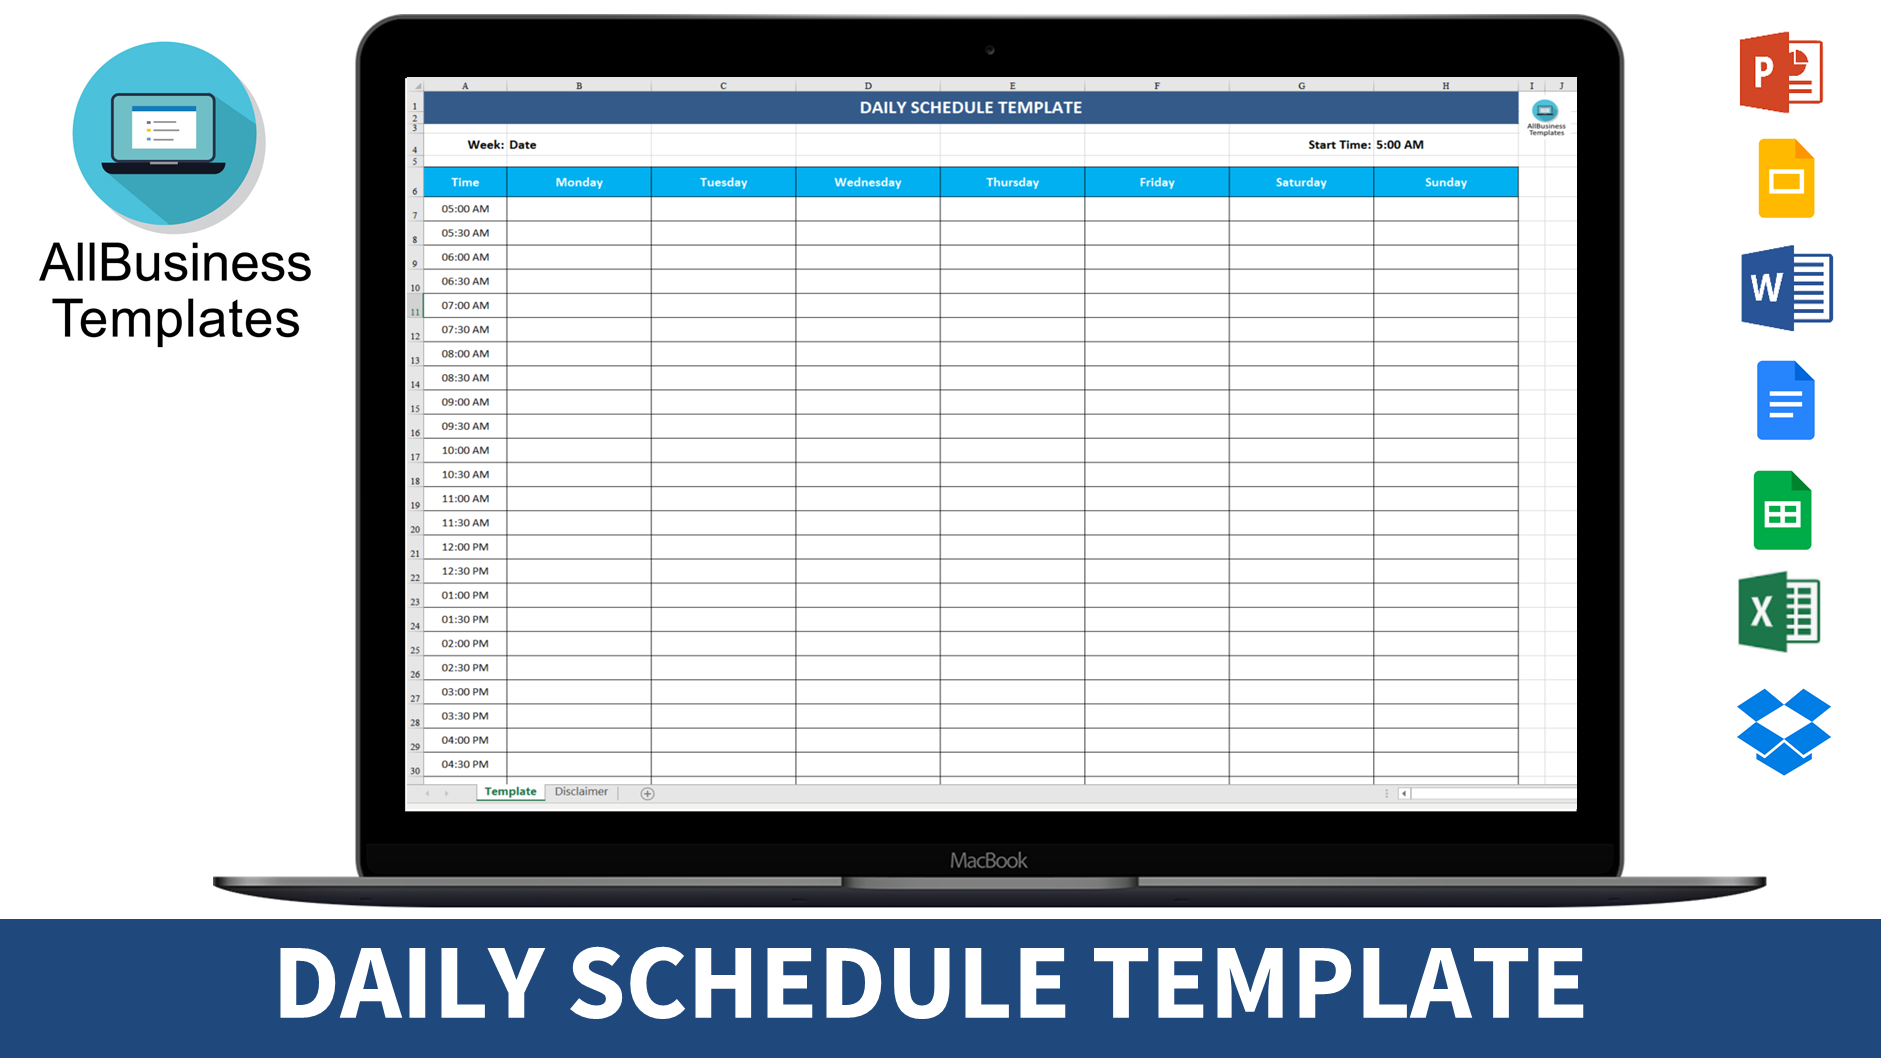 Daily Schedule Template main image